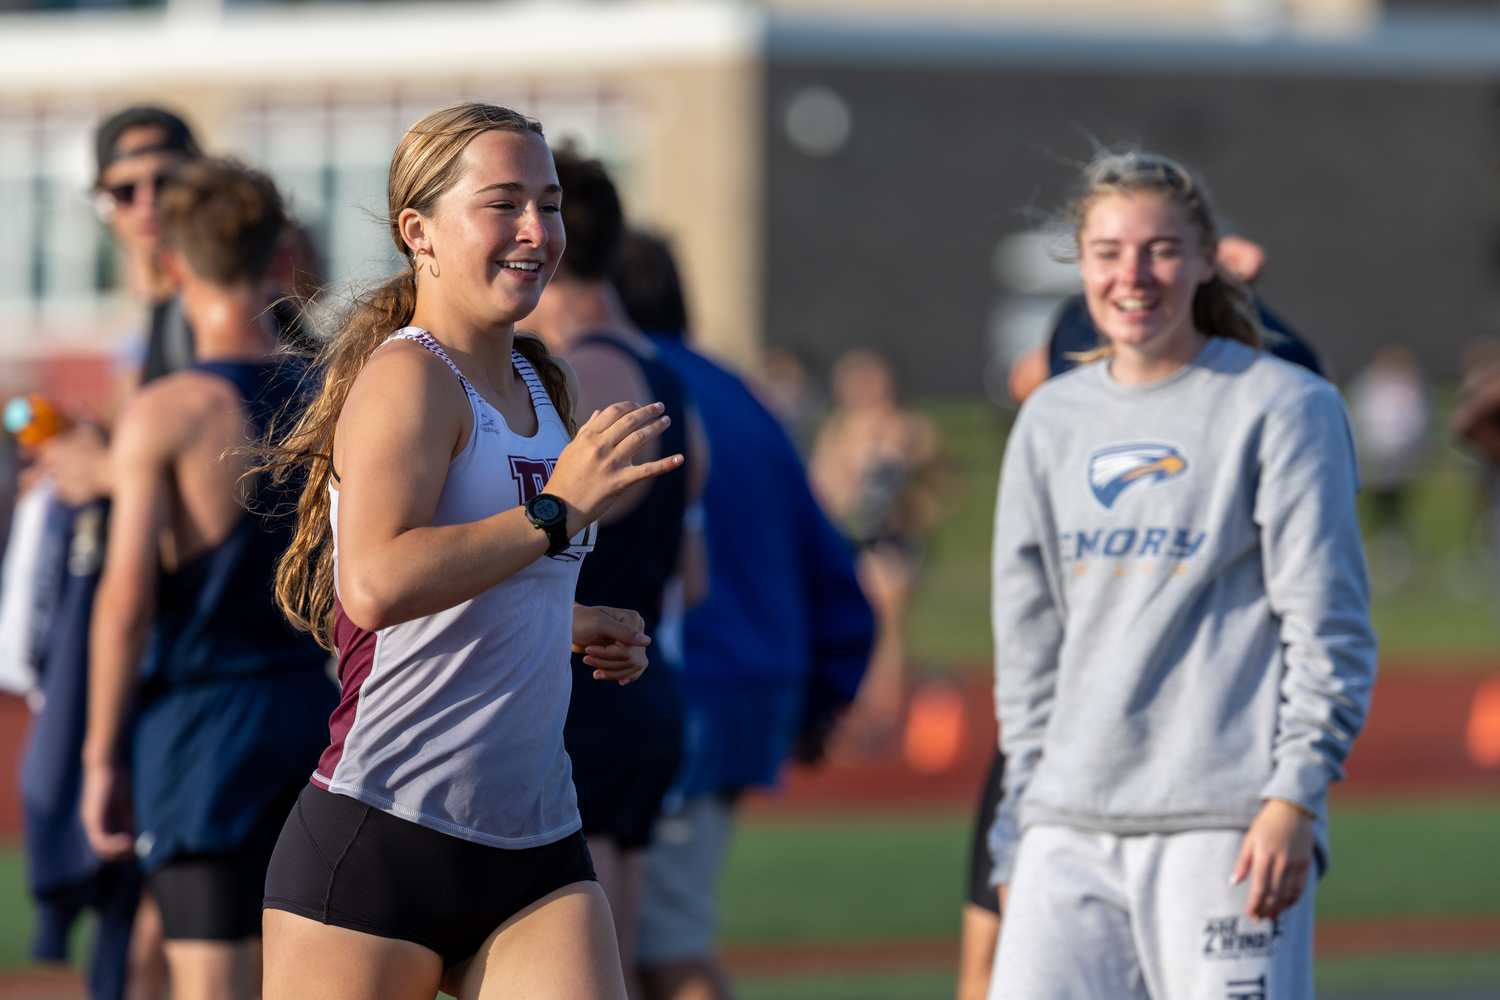 Dylan Cashin being cheered on by teammate Ryleigh O'Donnell as she competes in the 1,500-meter race walk. RON ESPOSITO